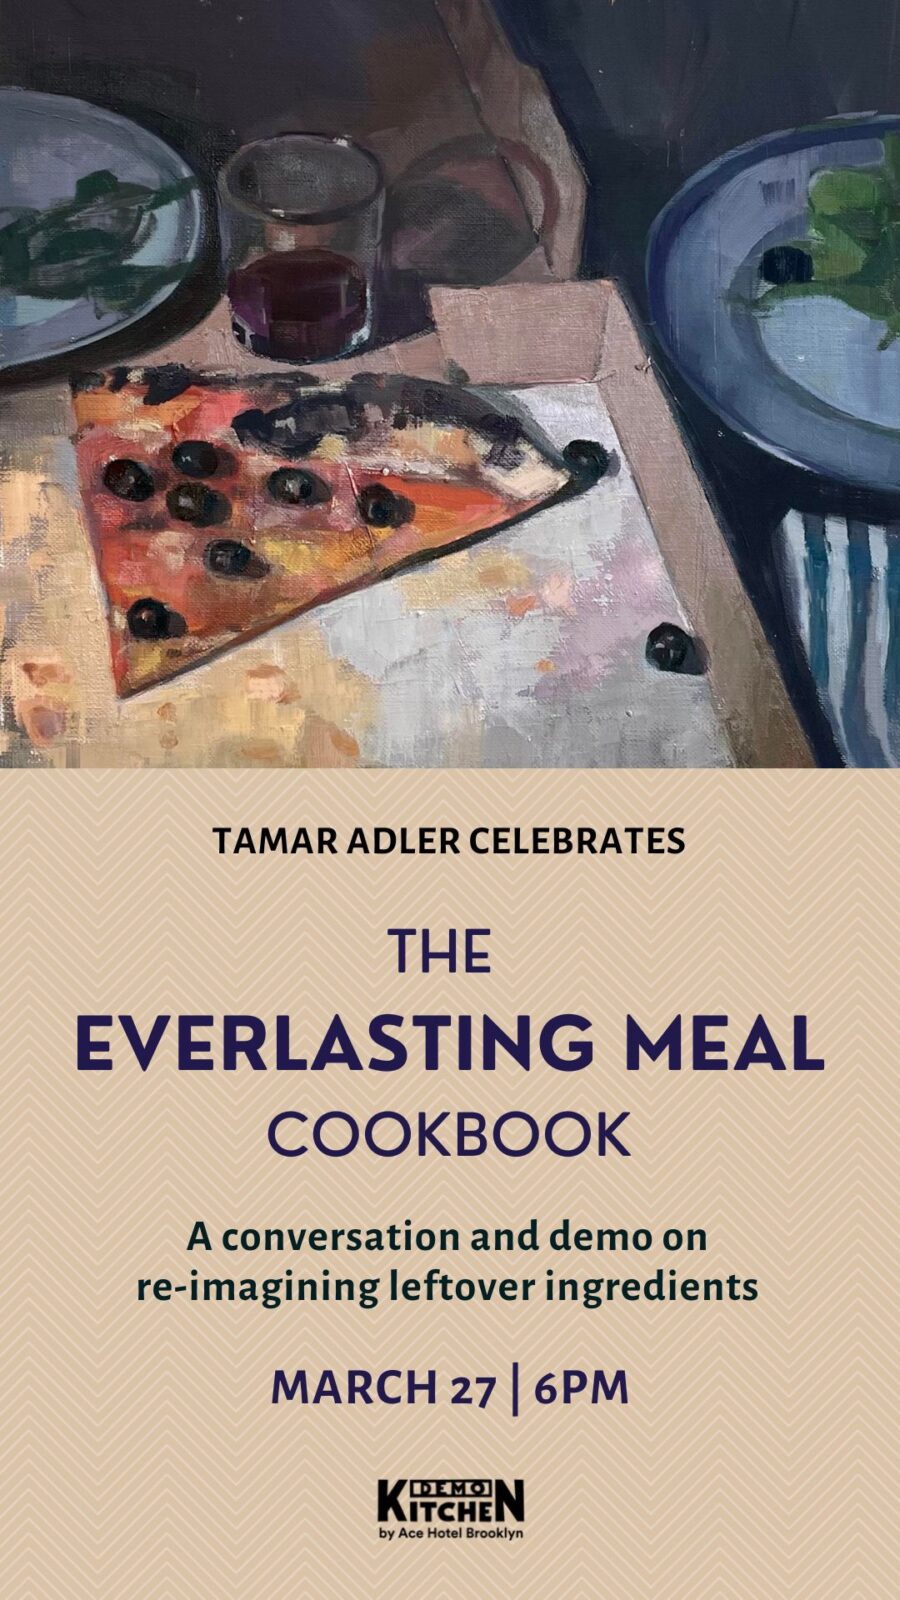 The Everlasting Meal Cookbook - March 27 at 6pm